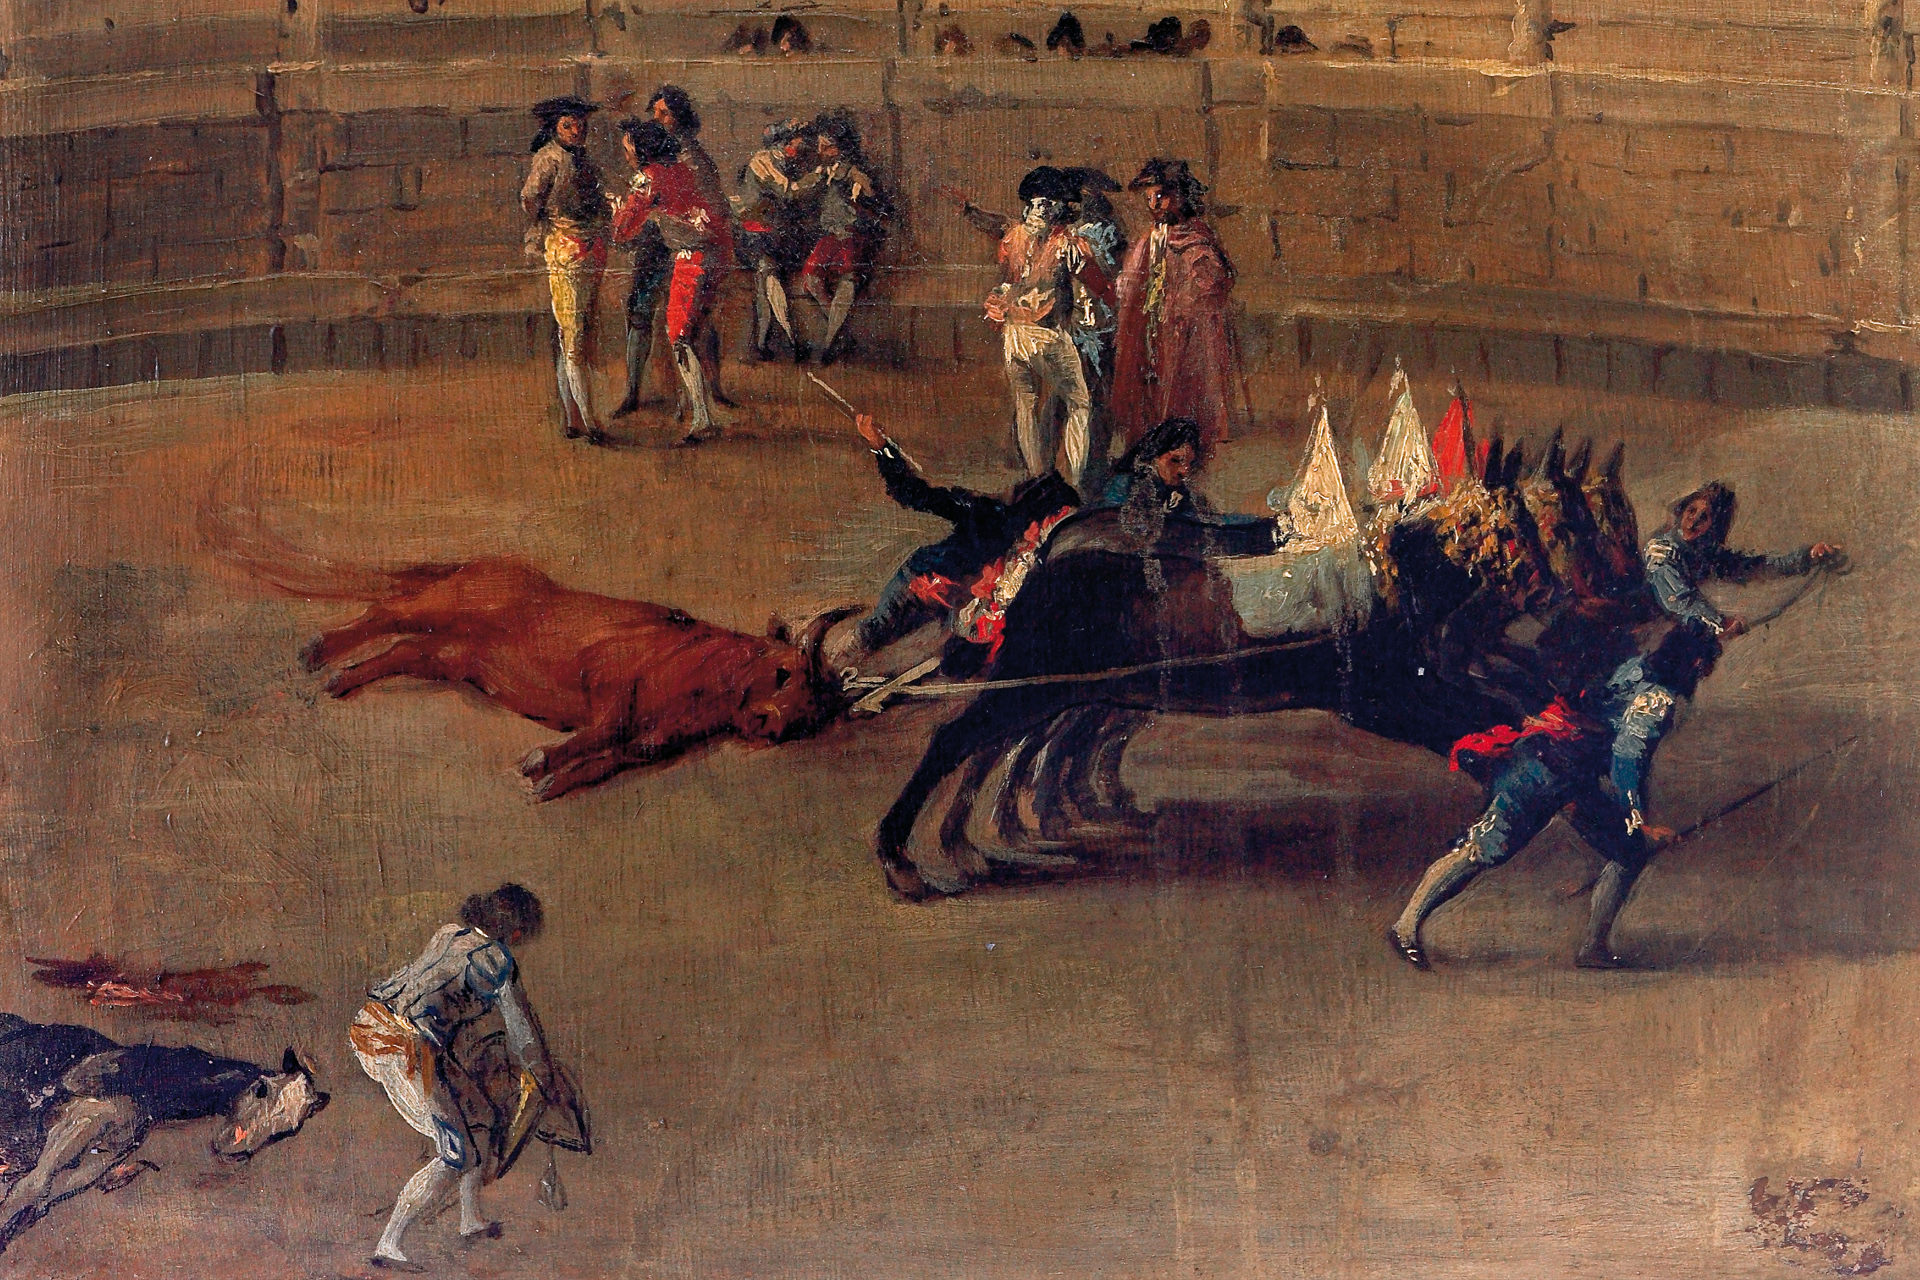 Detail. The Dragging of the Bull or the Mulillas. Francisco de Goya